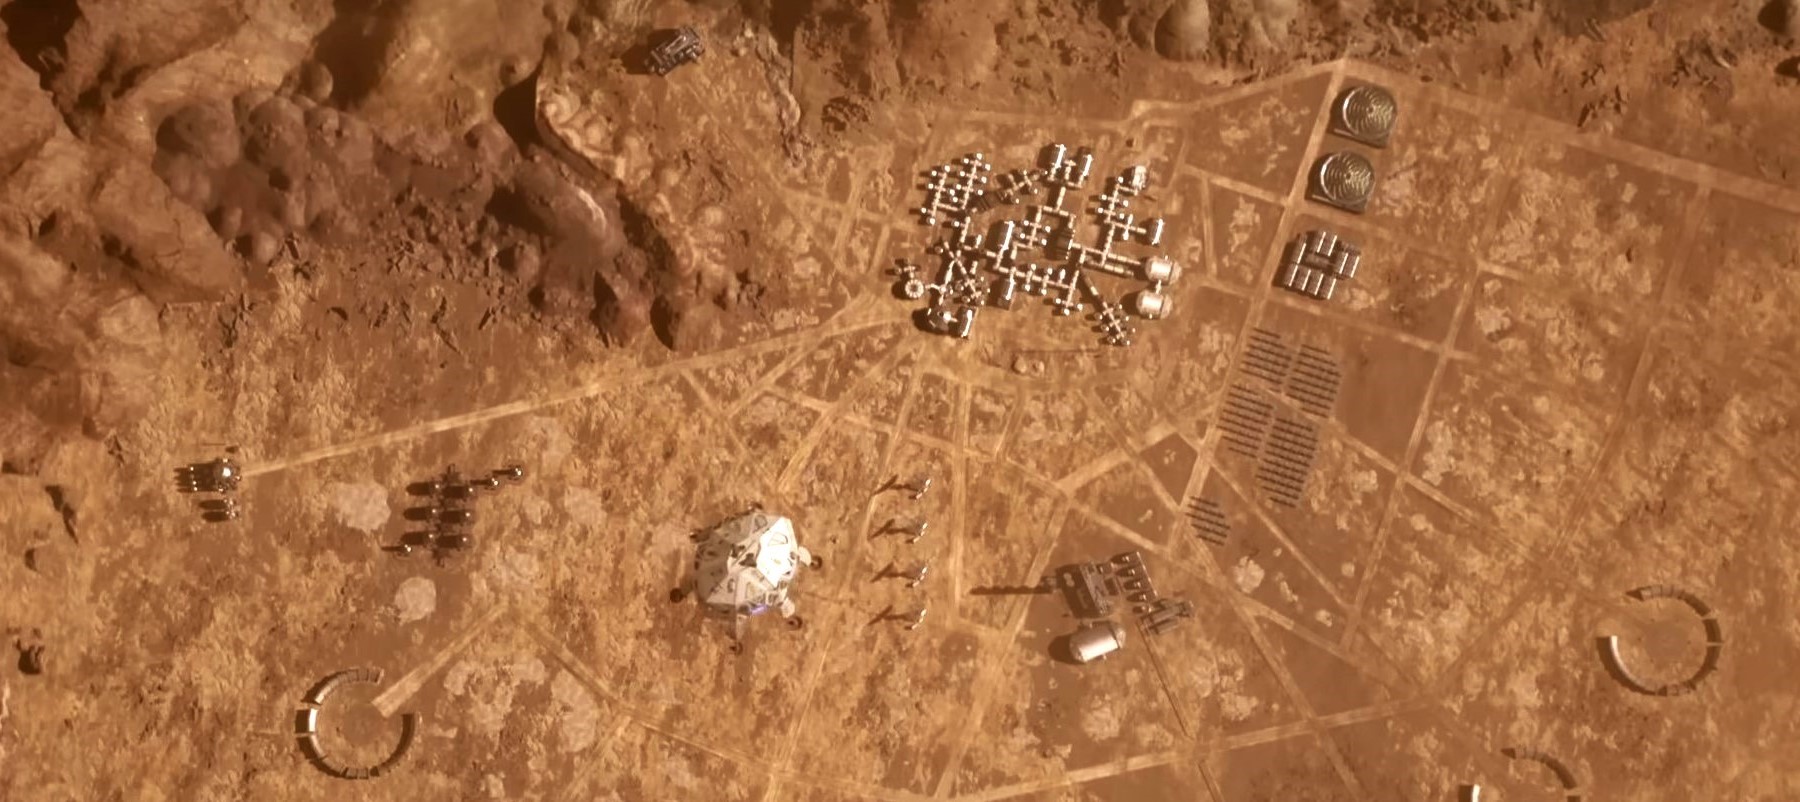 Illustration: Scene showing "For All Mankind" city on Mars from above